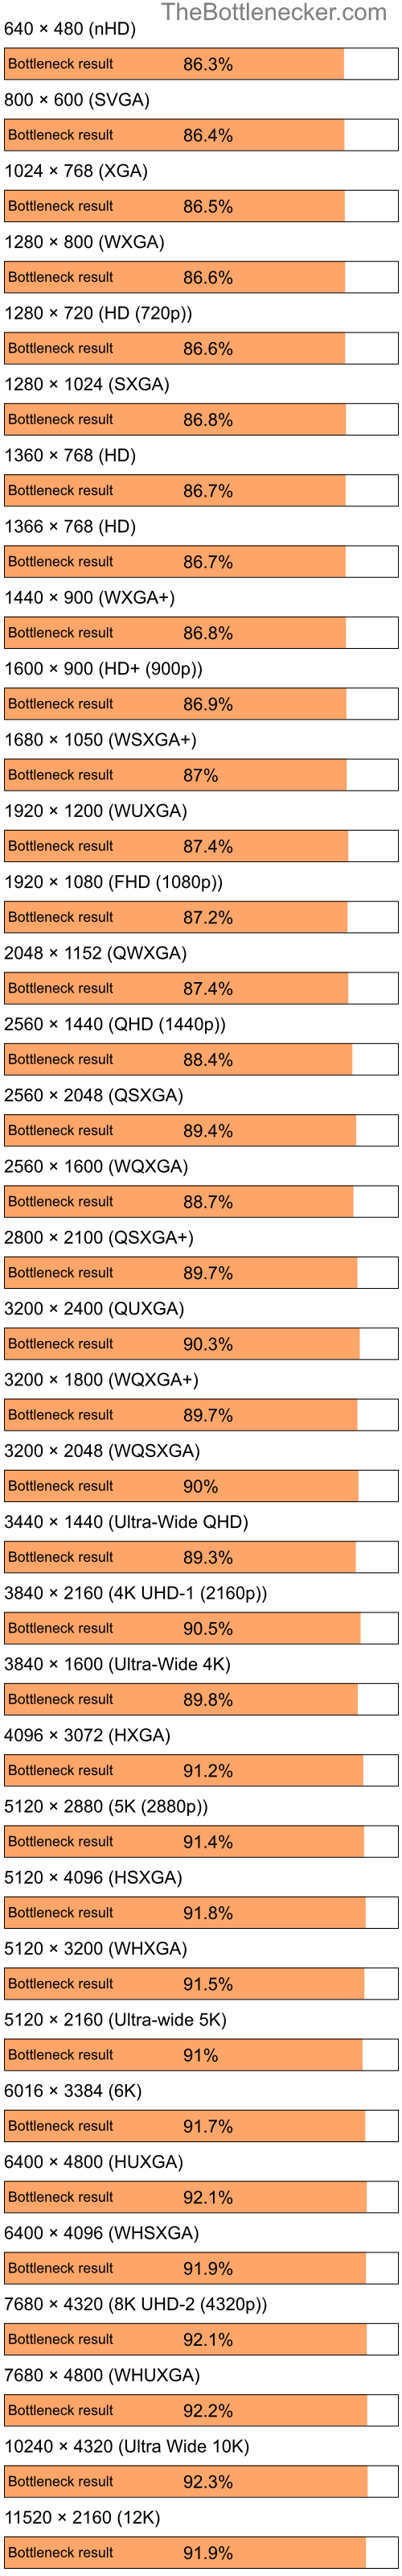 Bottleneck results by resolution for Intel Pentium 4 and NVIDIA GeForce Go 6200 in Graphic Card Intense Tasks